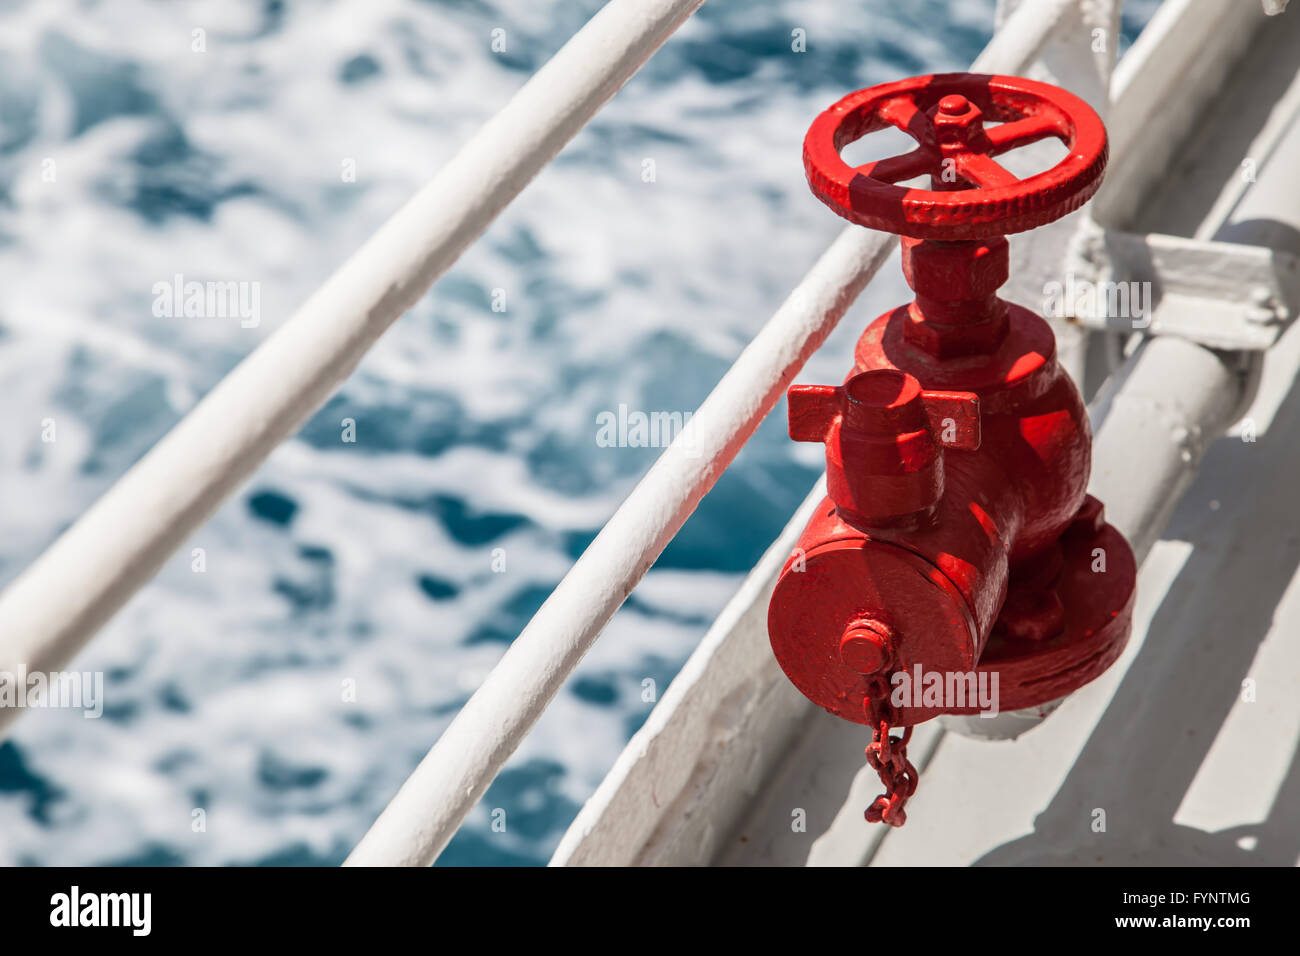 Red fire extinguisher with pipe connector on a boat with waves Stock Photo